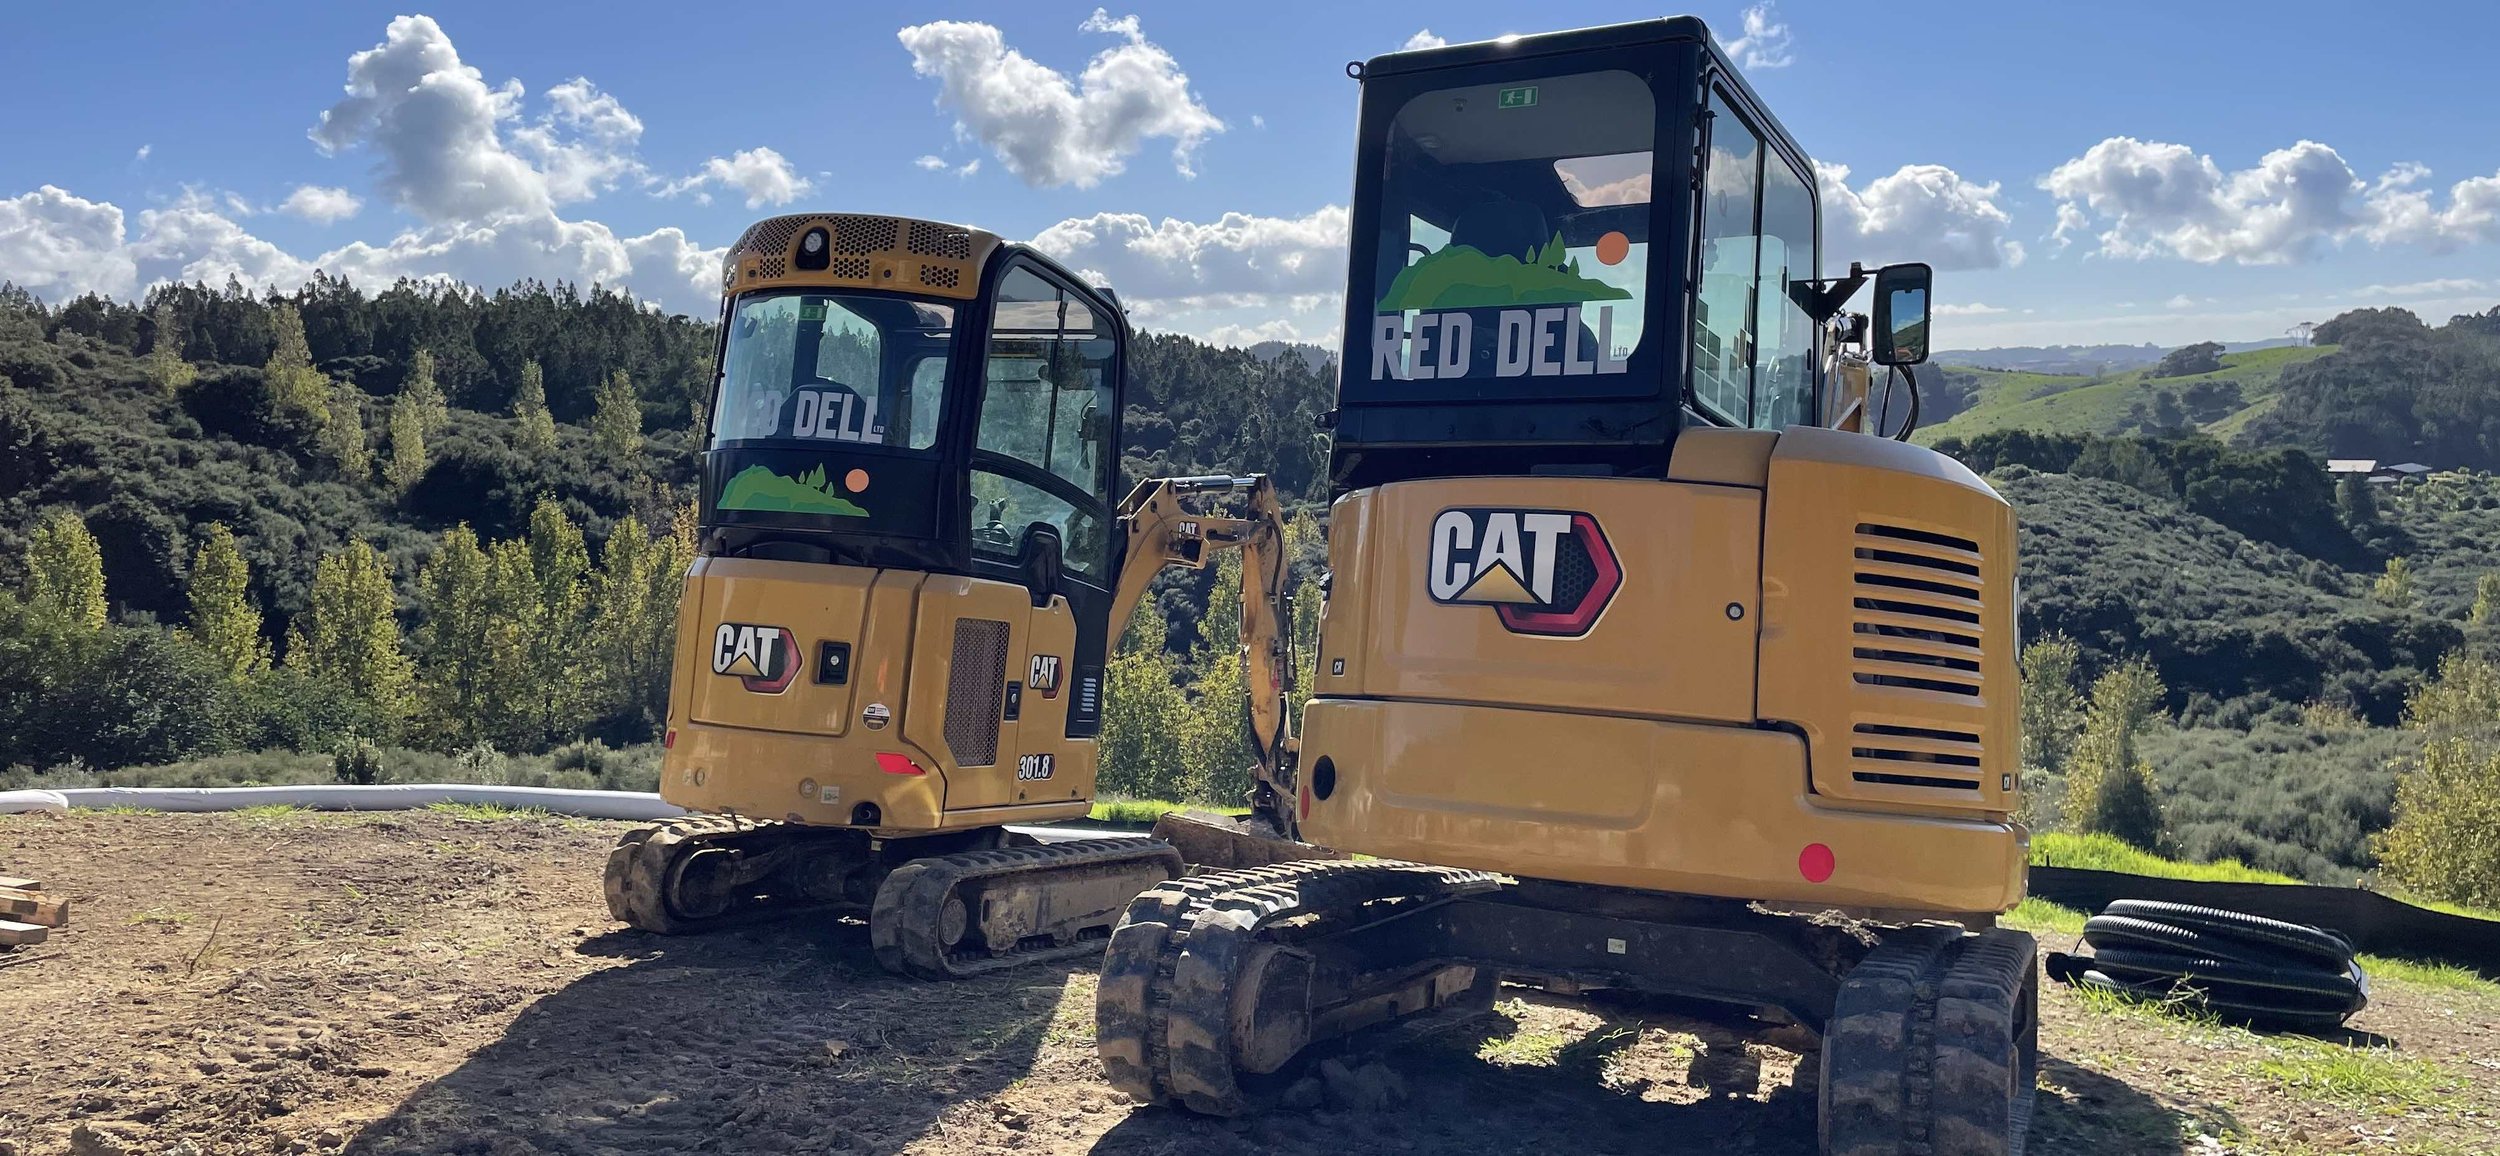 Red Dell Cat Diggers.jpg